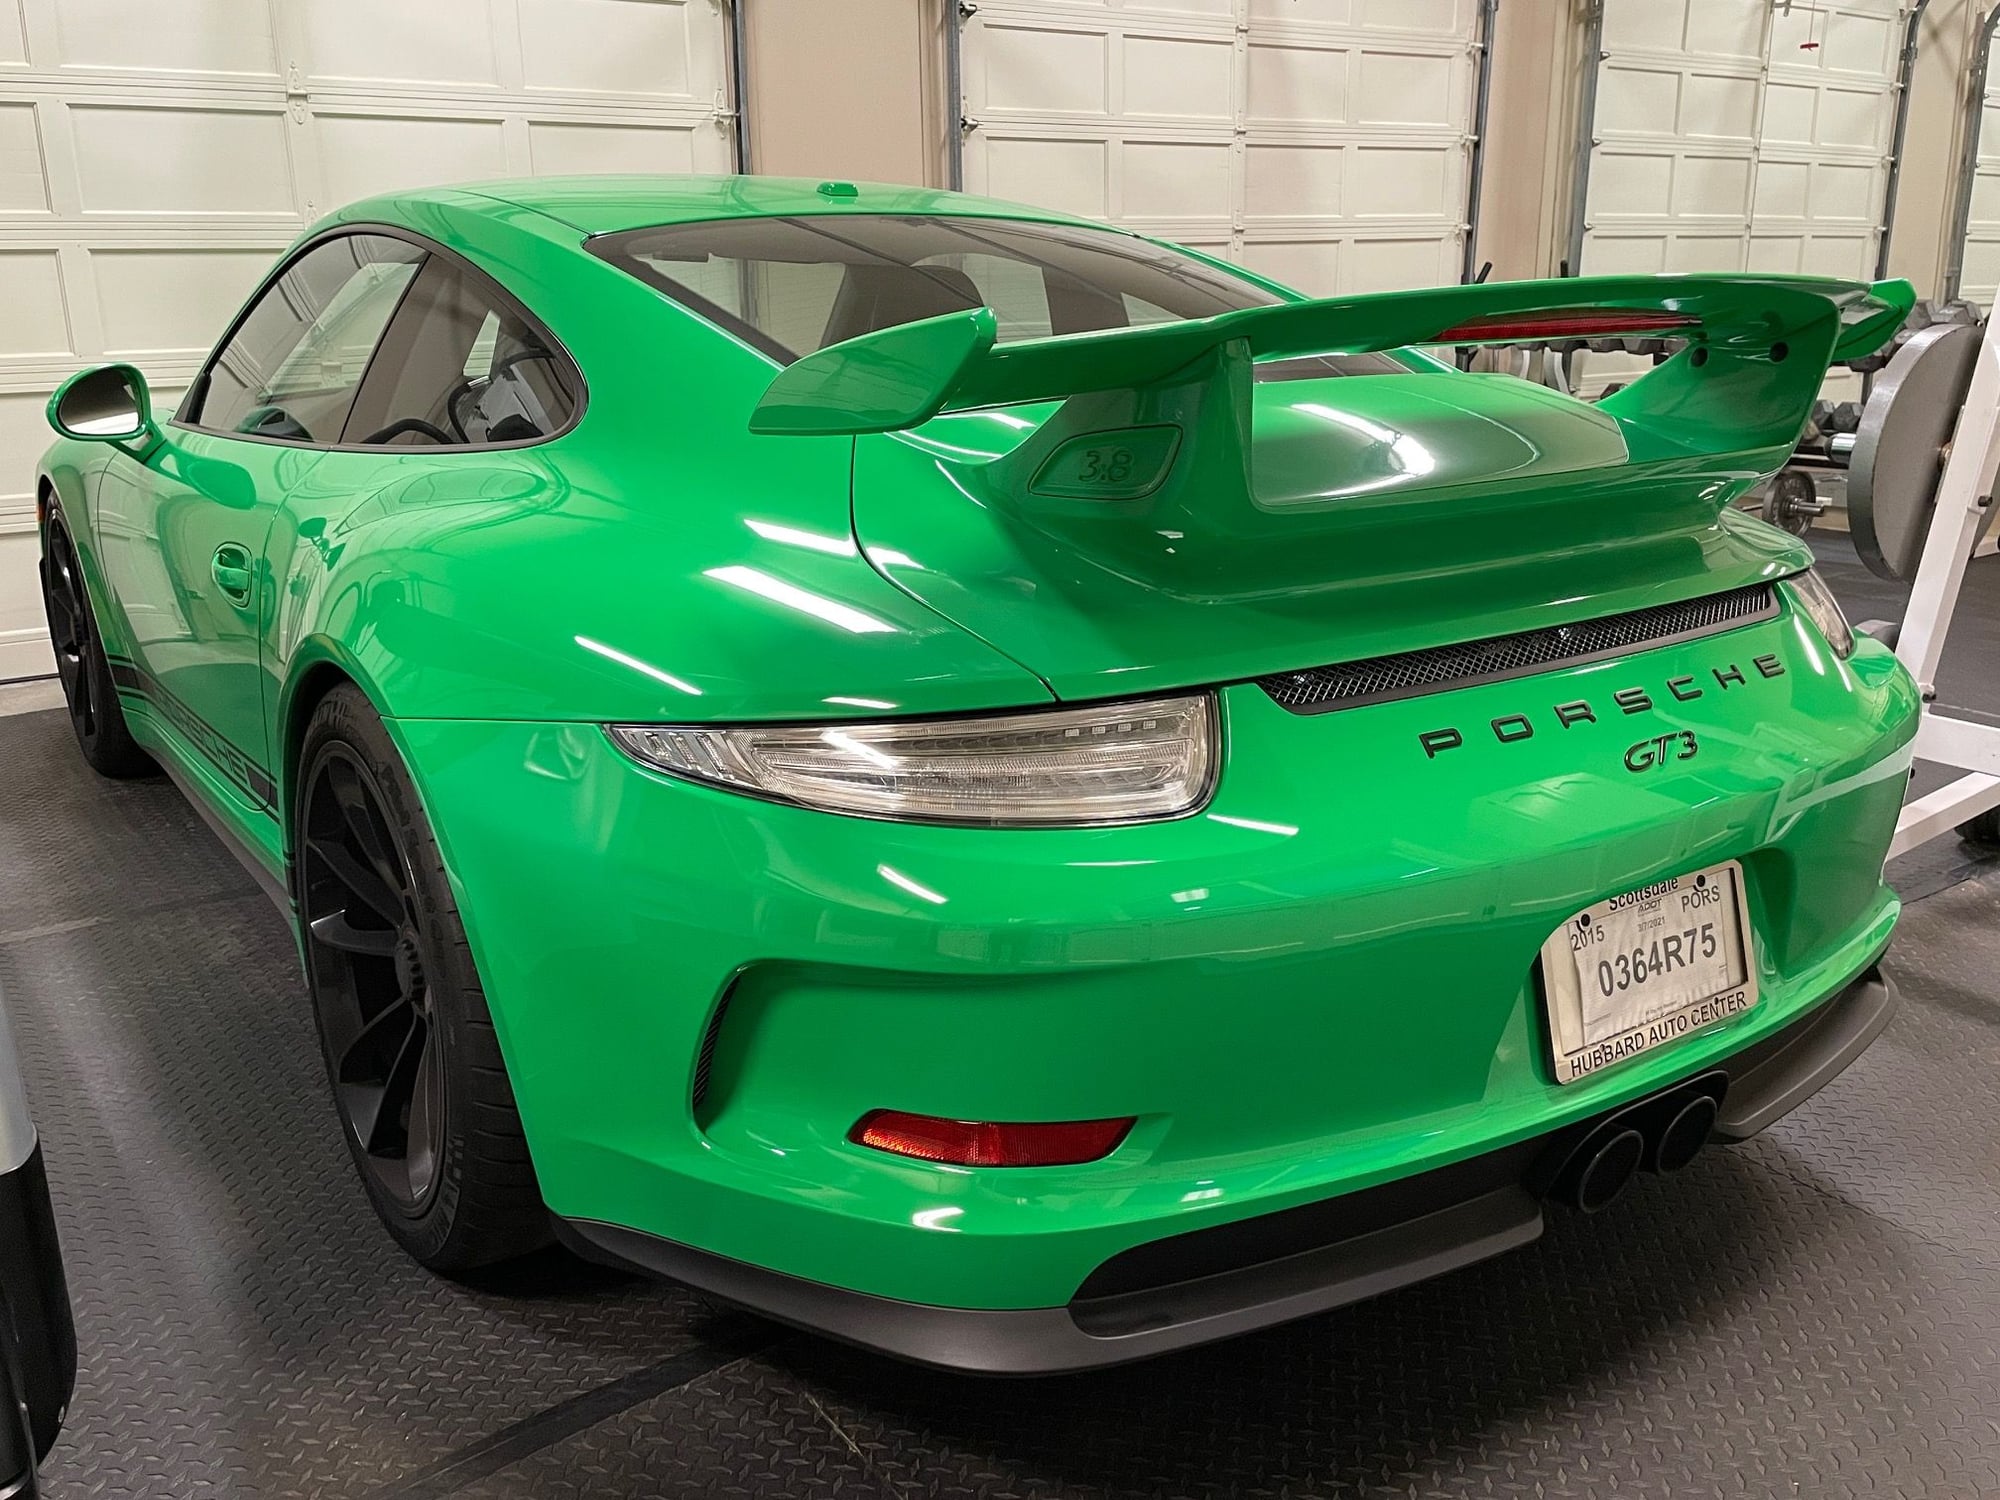 2015 GT3 PTS Signal Green (1 of 10) 3,700 miles Mint Condition ...